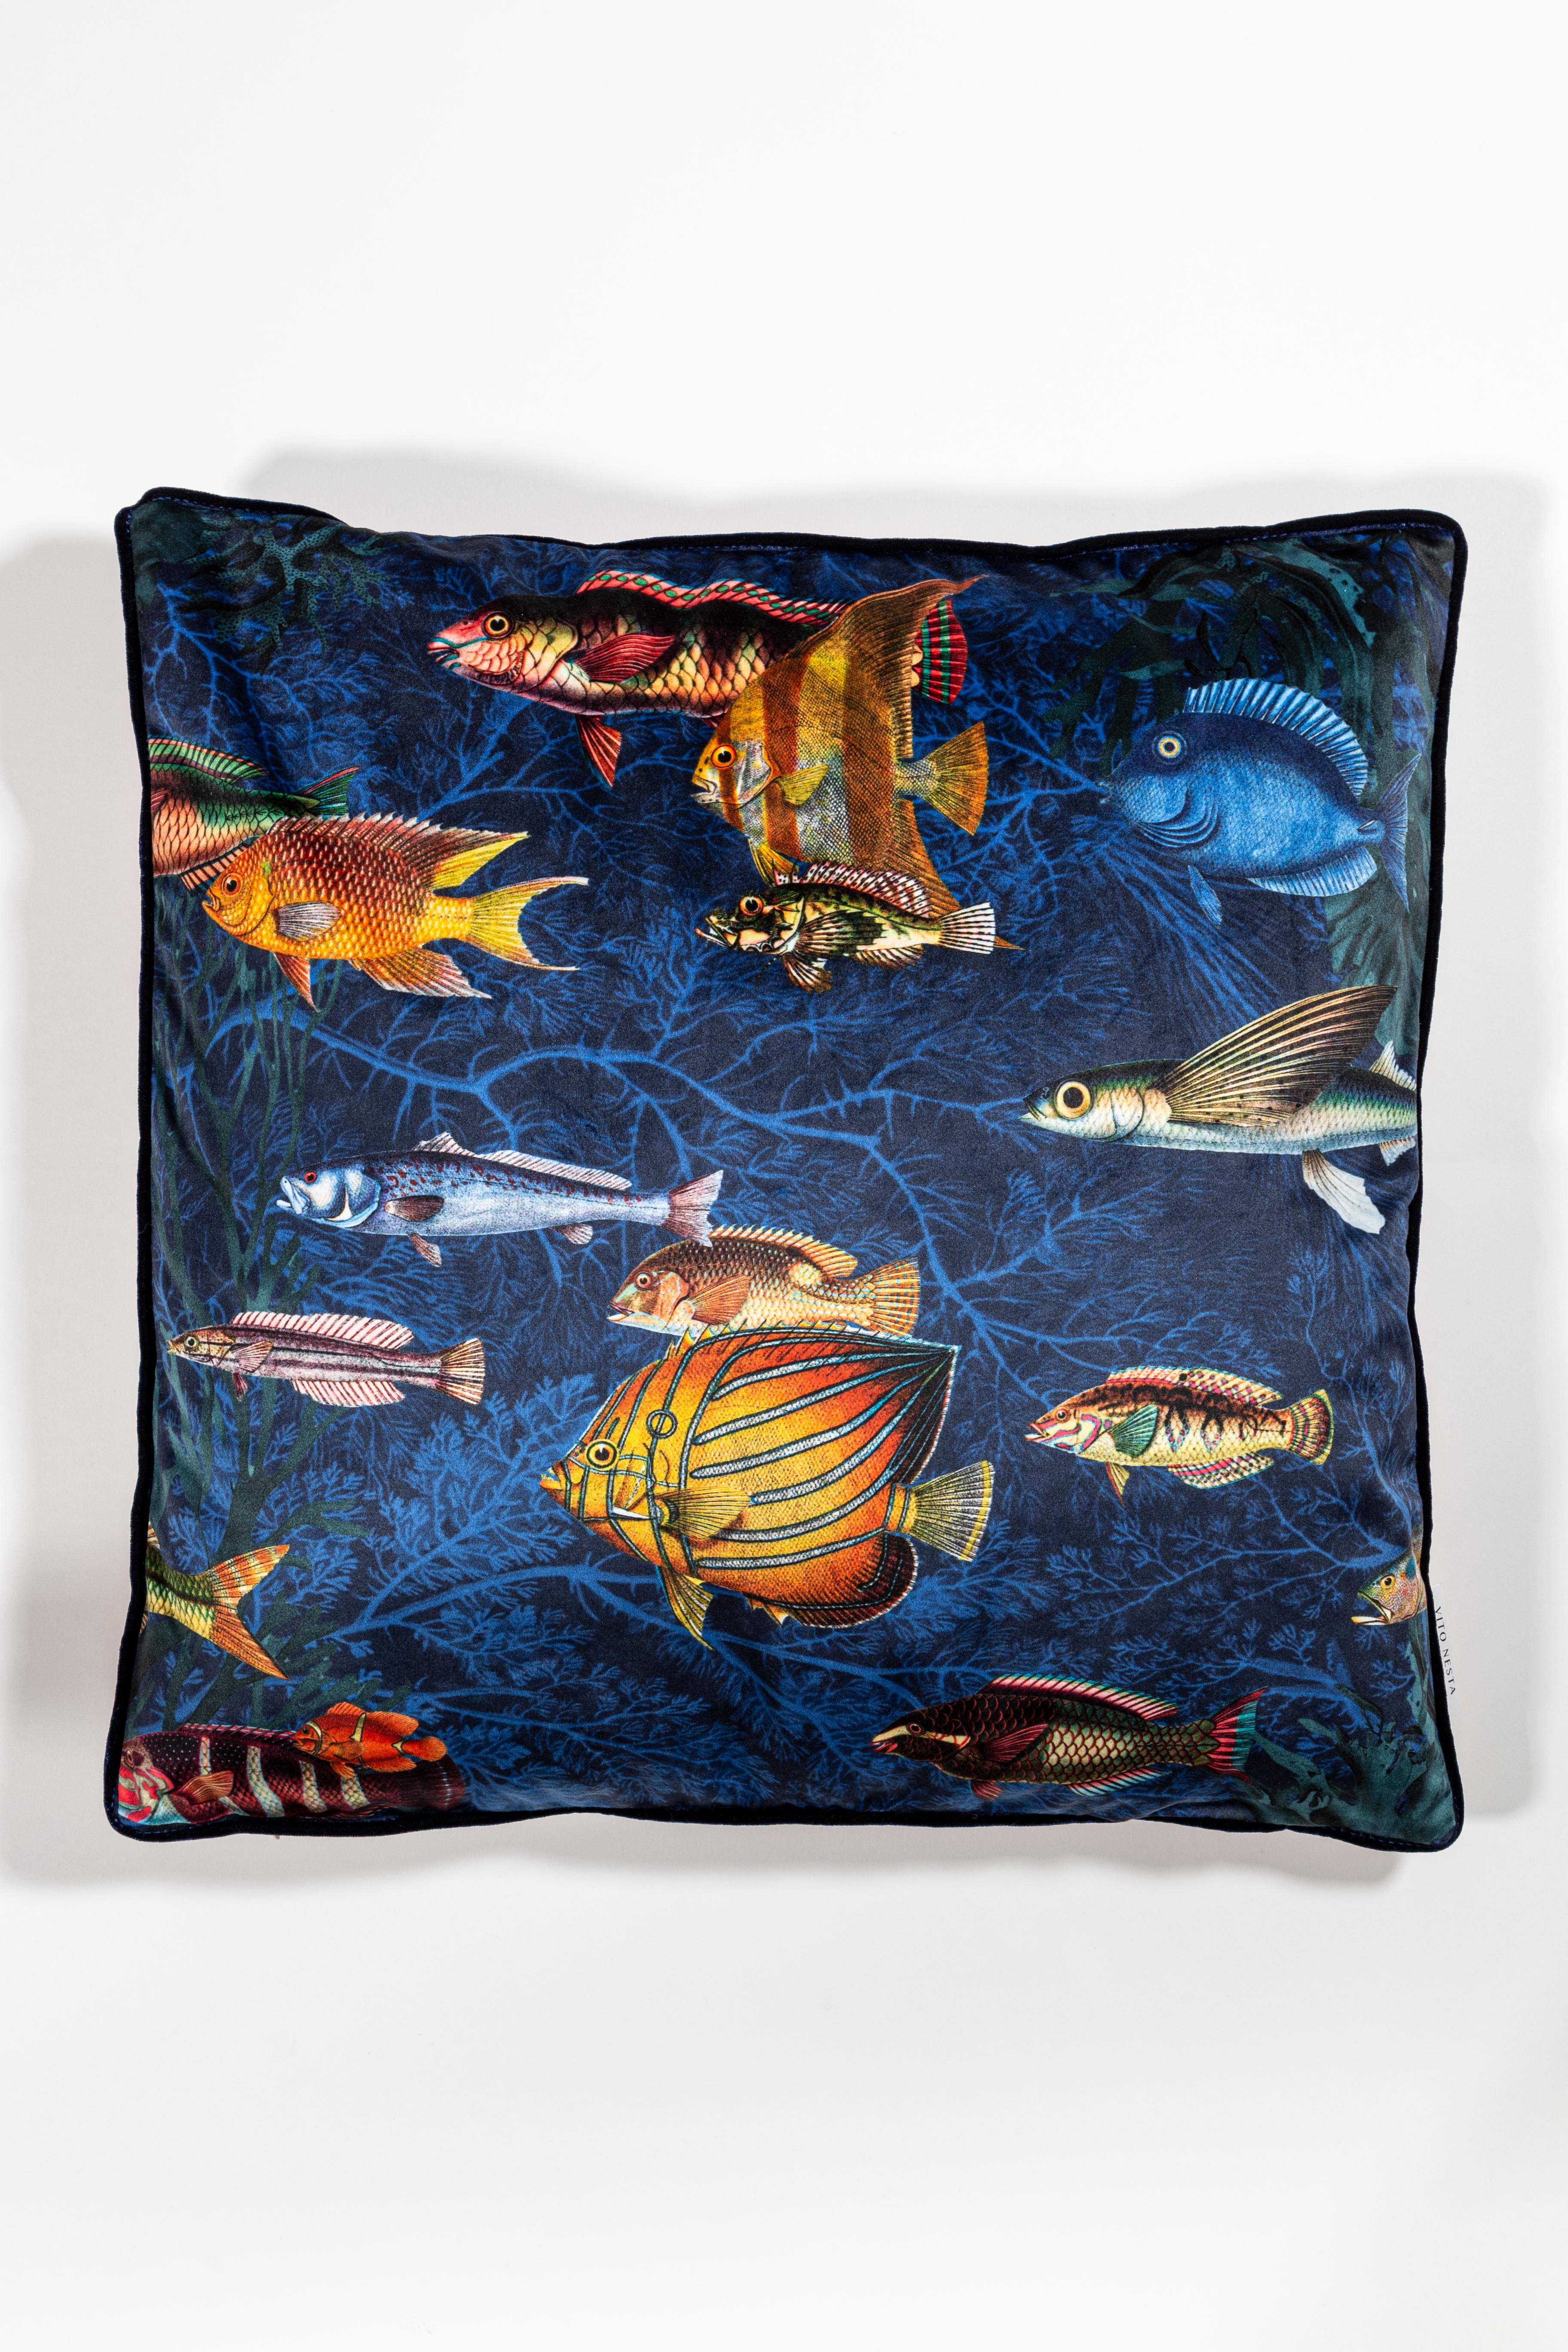 Amami, Contemporary Velvet Printed Pillow by Vito Nesta For Sale 2